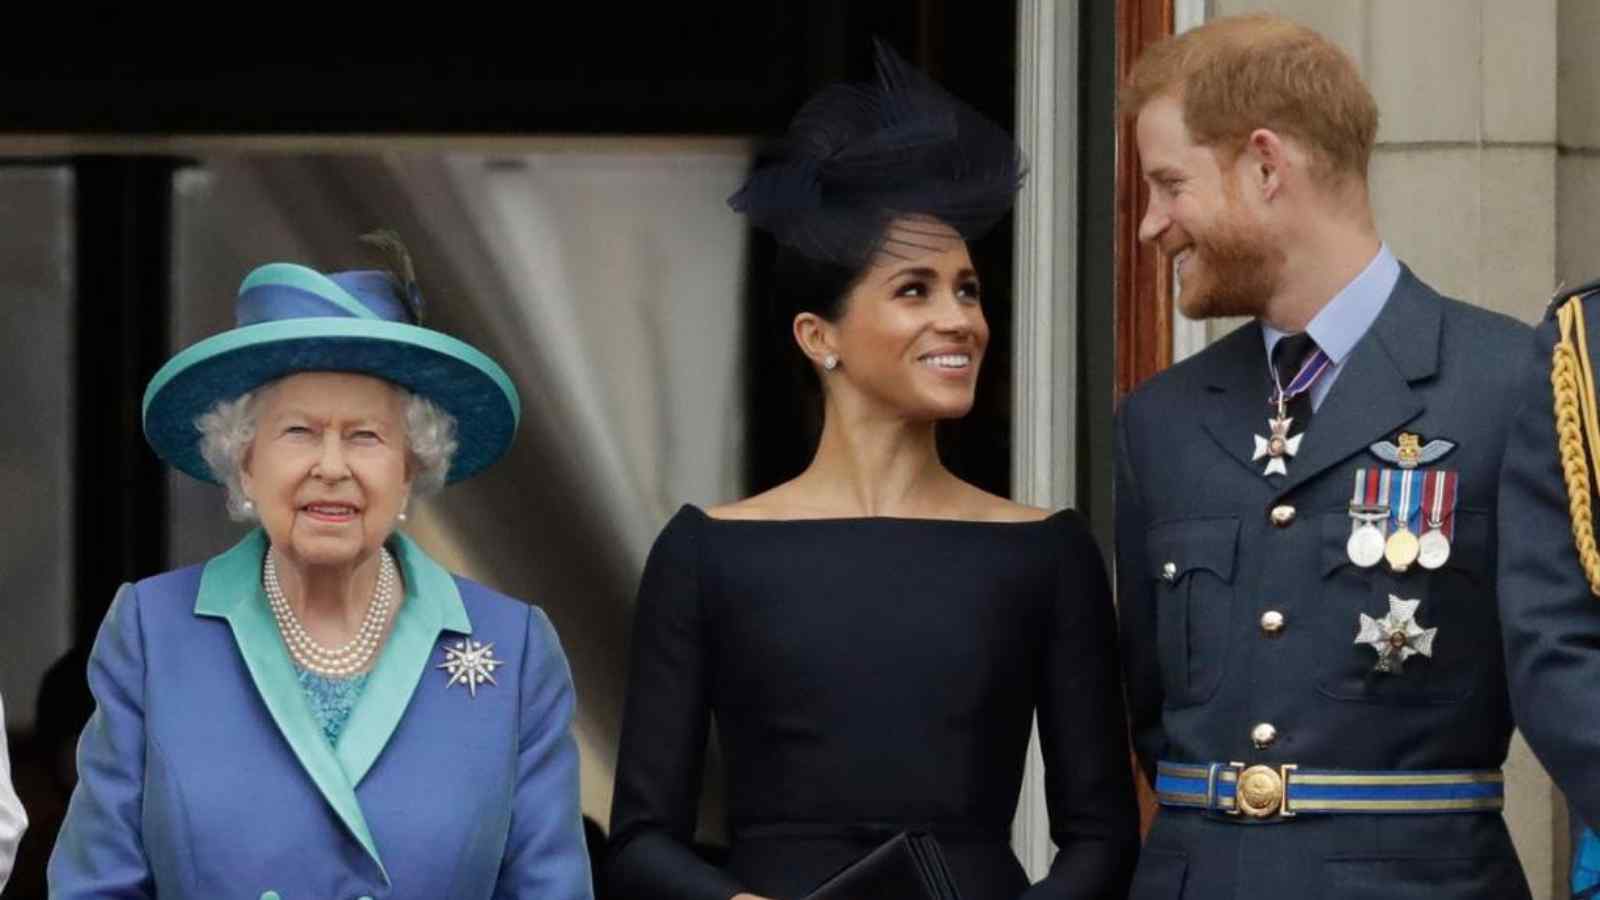 A monarch rule that Queen Elizabeth II broke because of Prince Harry and Meghan Markle